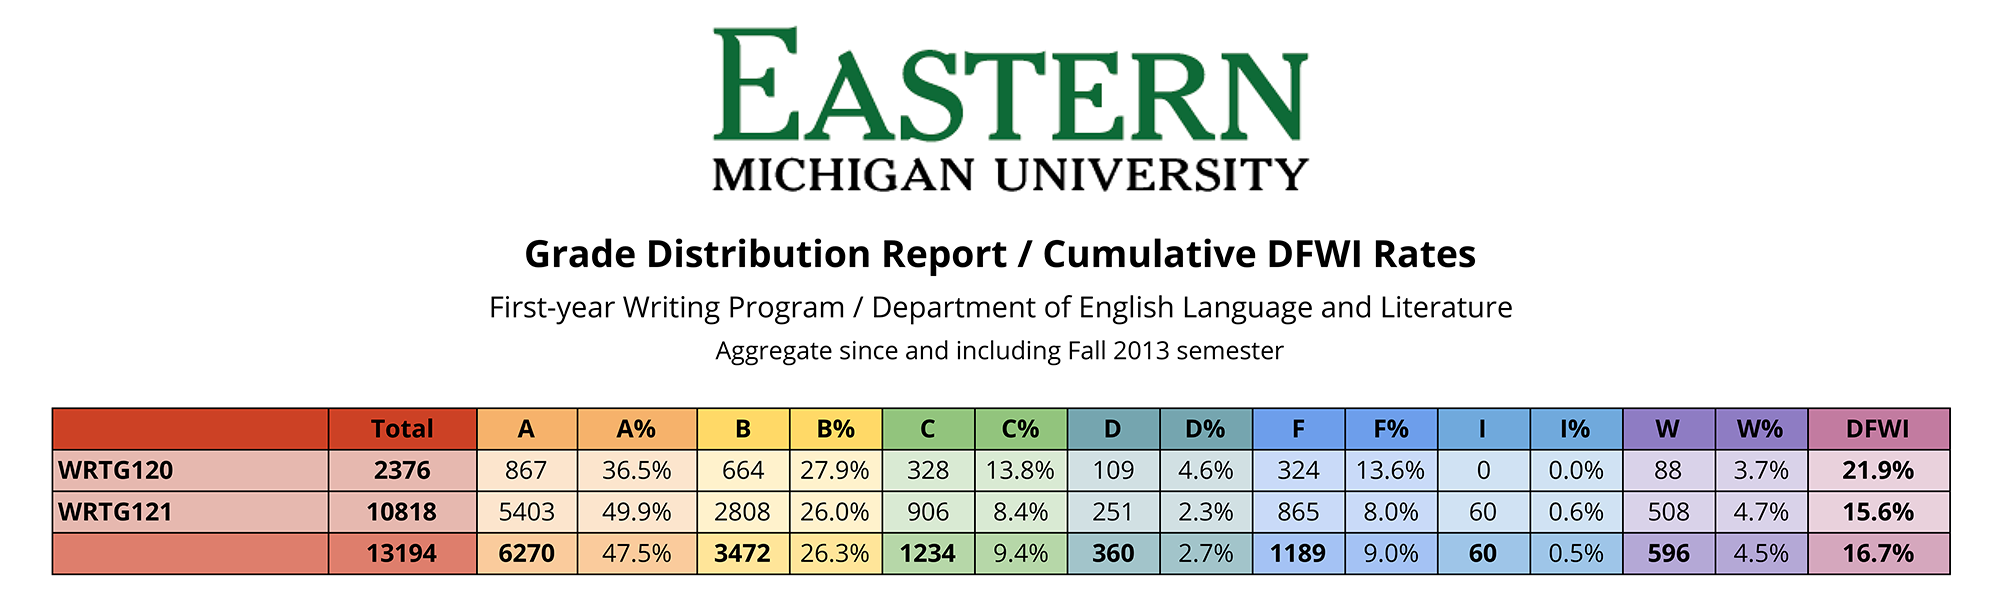 Table 1. A multicolor table presents aggregate grade information over five years from sections of first-year writing at Eastern Michigan University, 2013-2017. Out of the 13,194 students tabulated, 16.7%, or 2,205 students were assigned a D, an F, a W, or an I.